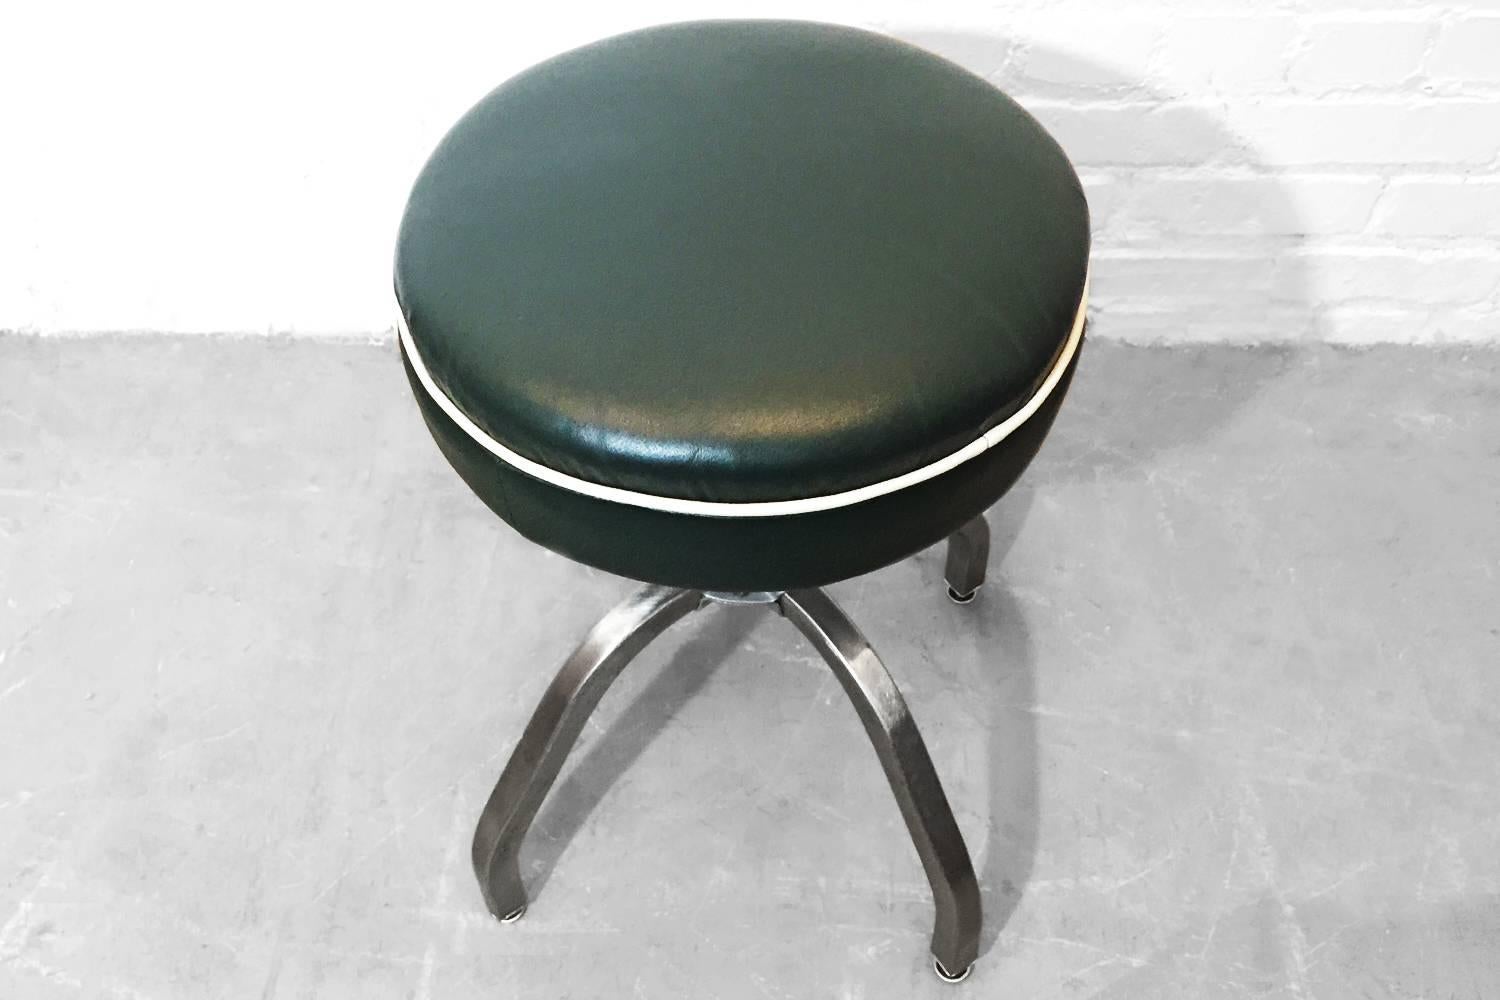 Very rare set of two vintage chrome salon stools from Buty-Crafters. These were rescued from a 70 yr old beauty supply manufacturing facility in Los Angeles.
Chrome has been brushed out and clear coated. Reupholstered in recycled dark green